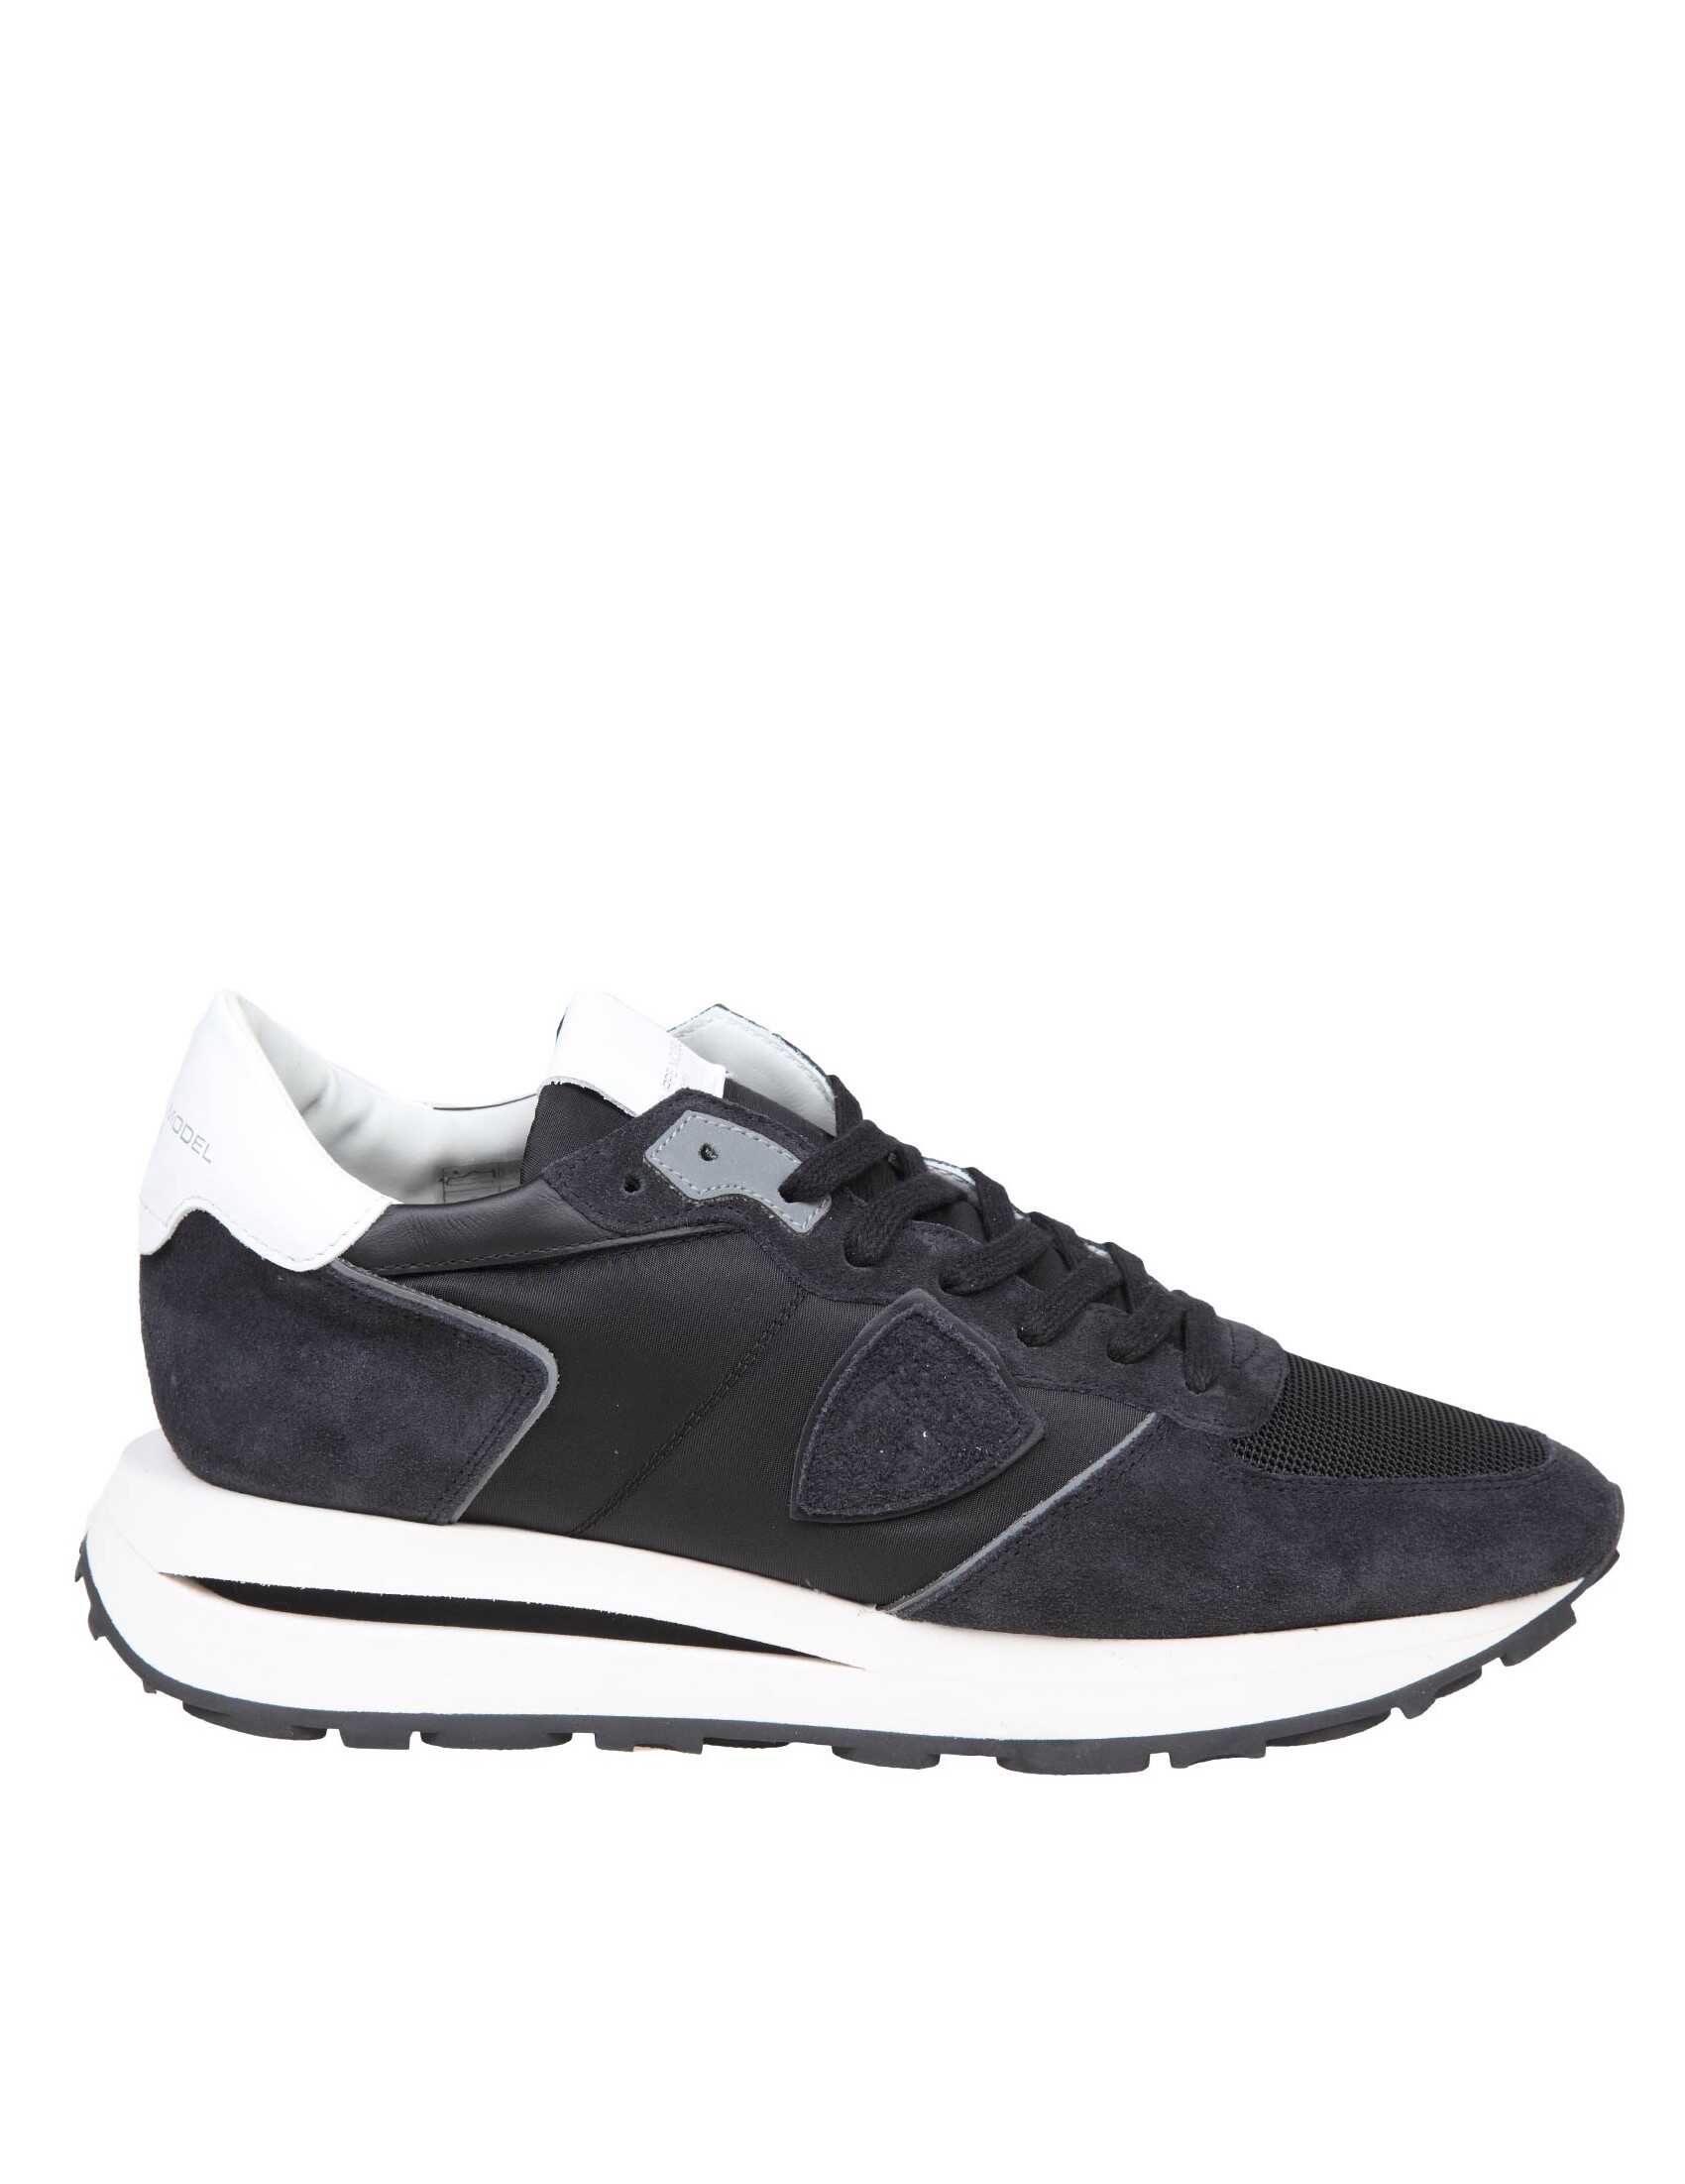 Philippe Model Philippe model tropez sneakers in suede and nylon color black Black